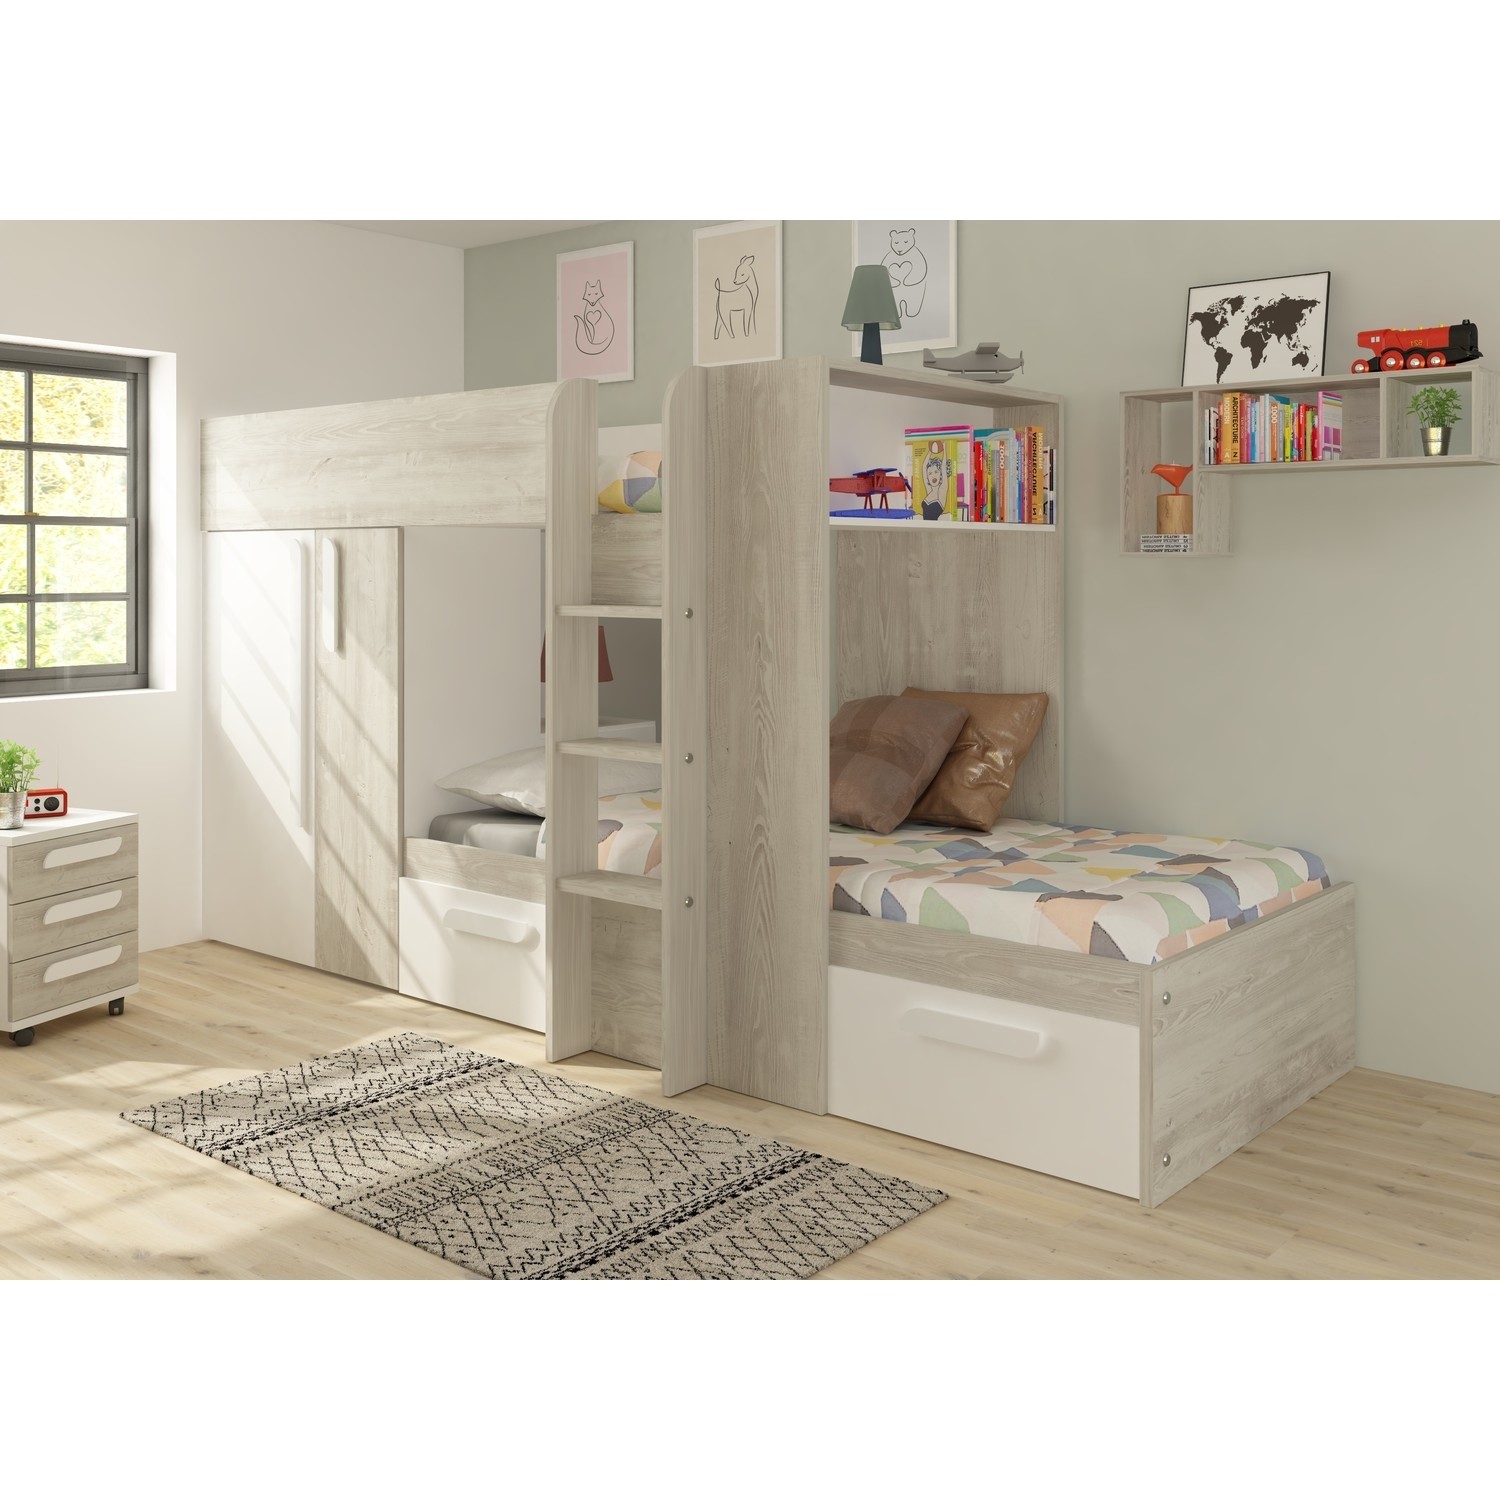 Read more about White and oak bunk bed with wardrobe and storage drawers barca kids avenue